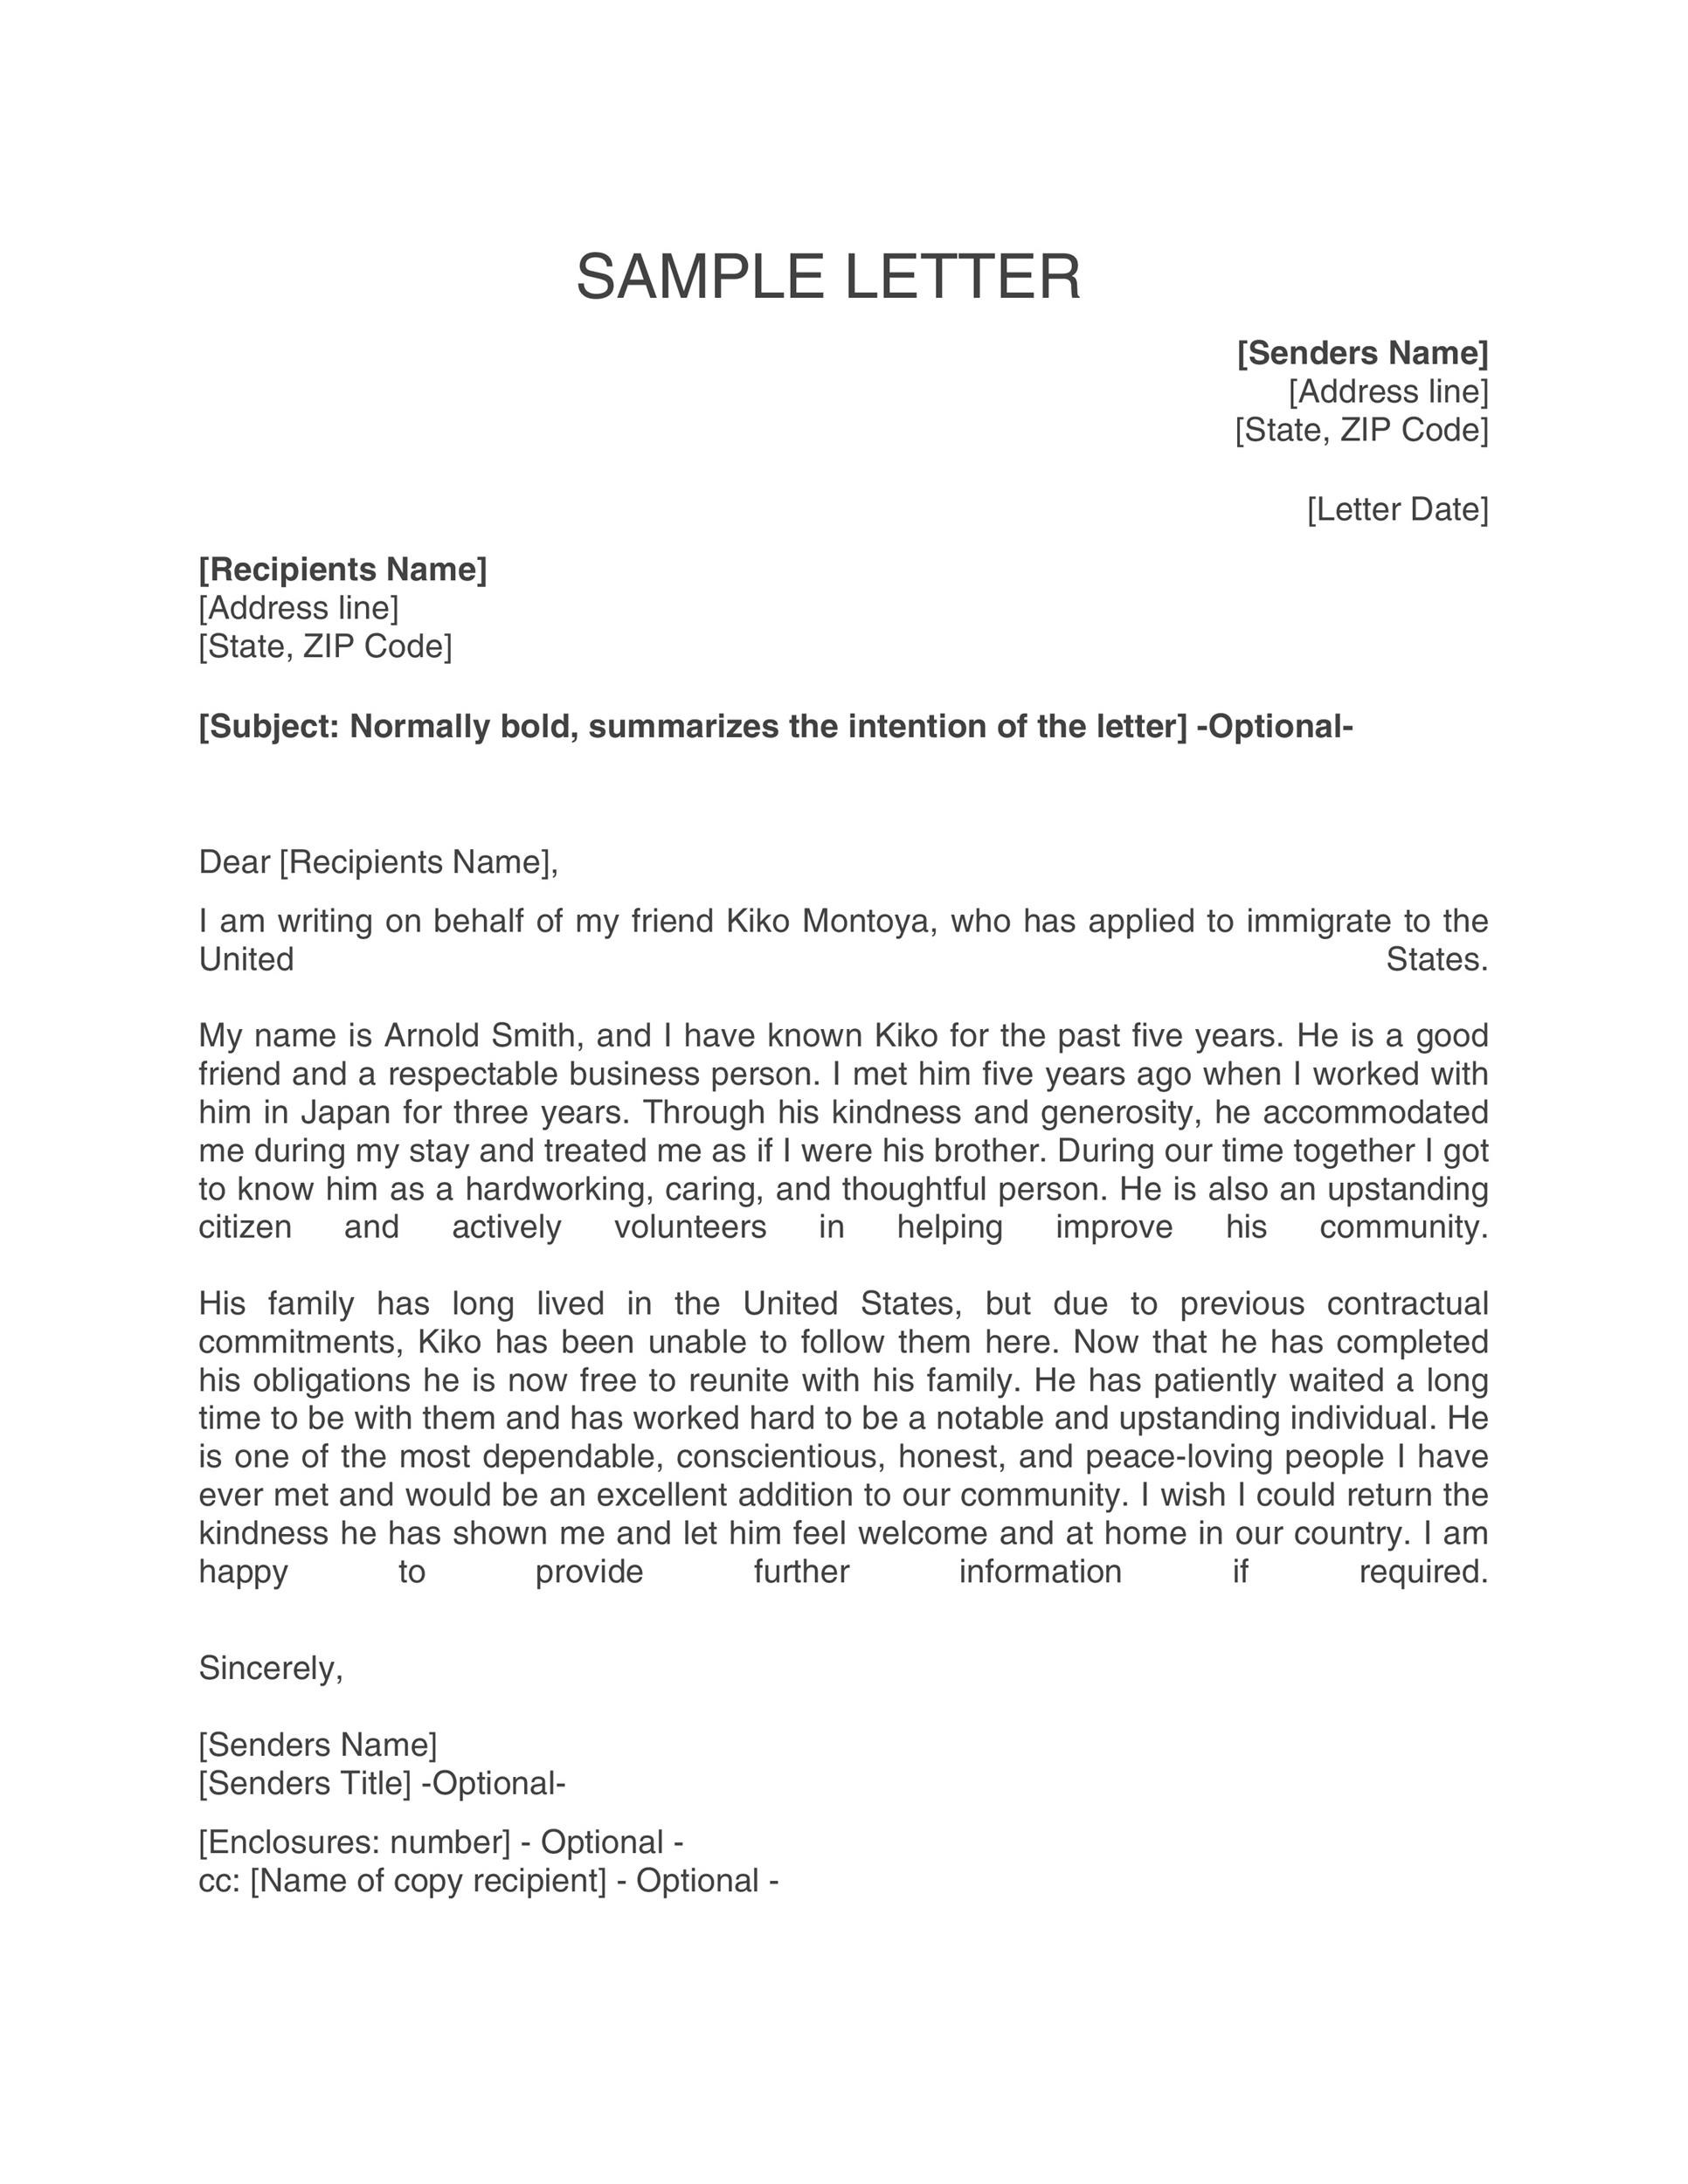 Sample Letter Of Recommendation For Immigration Residency from templatelab.com